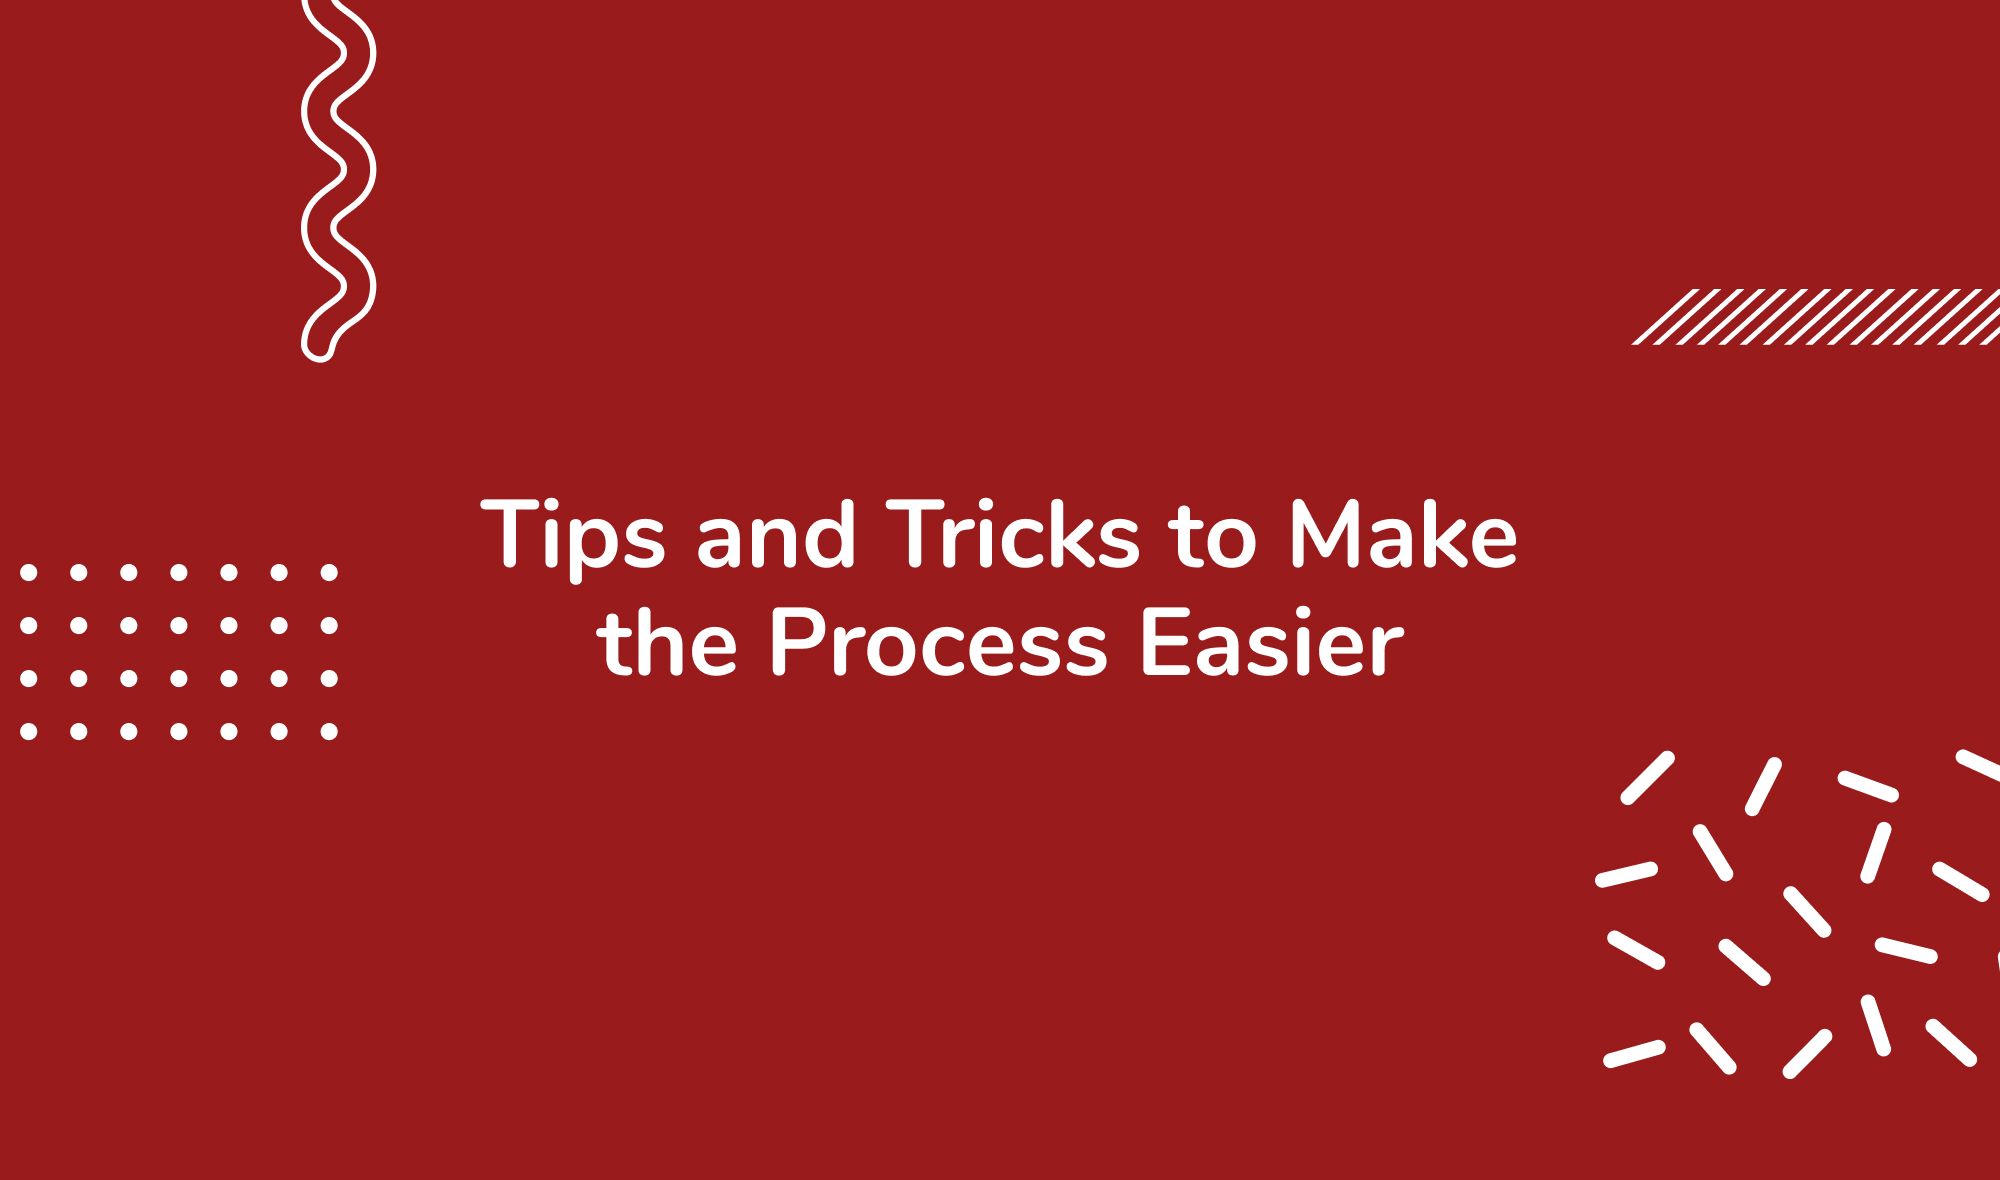 Tips and Tricks to Make the Process Easier